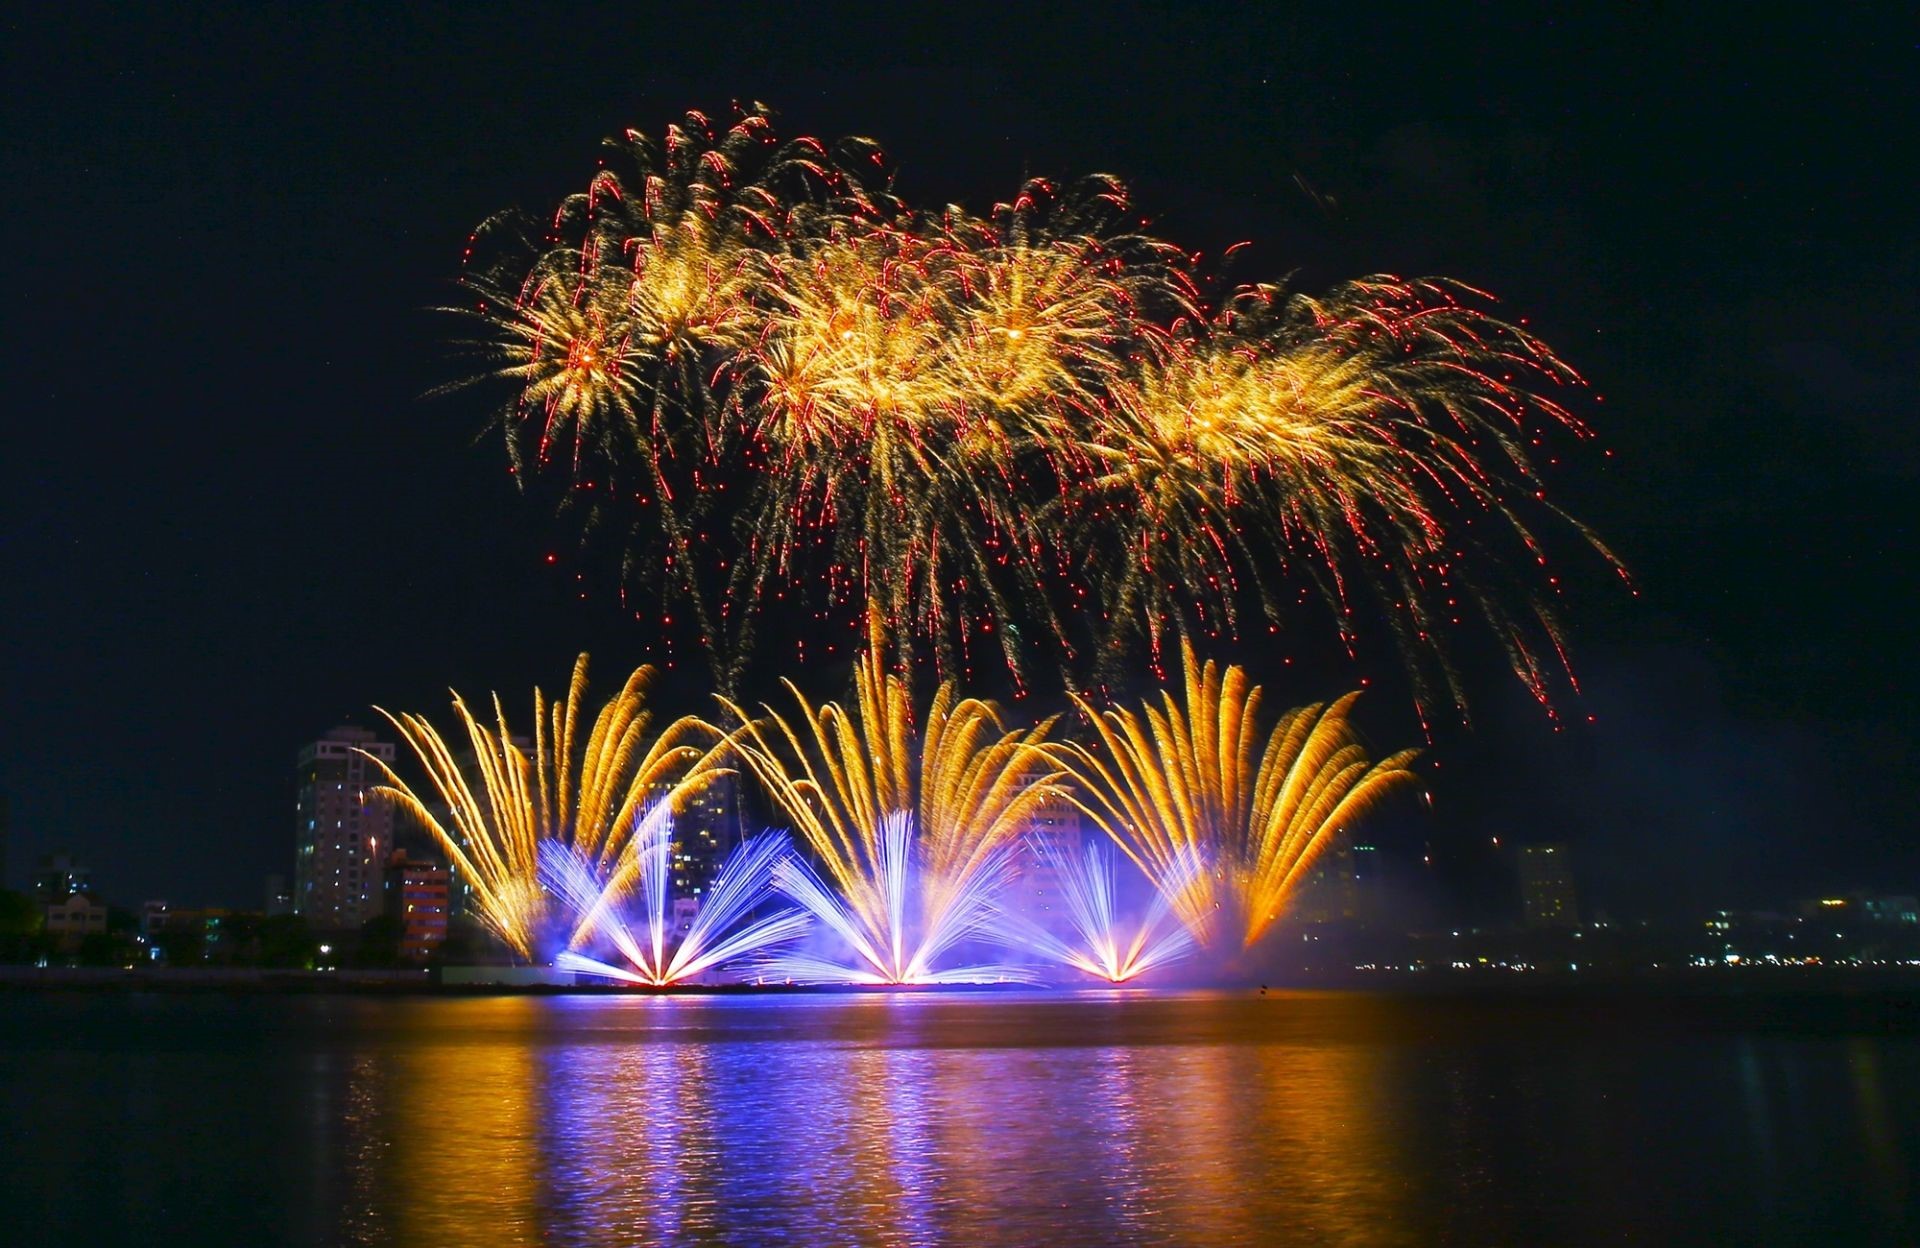 Vietnam's fireworks performance is likened to the audience as the pinnacle 